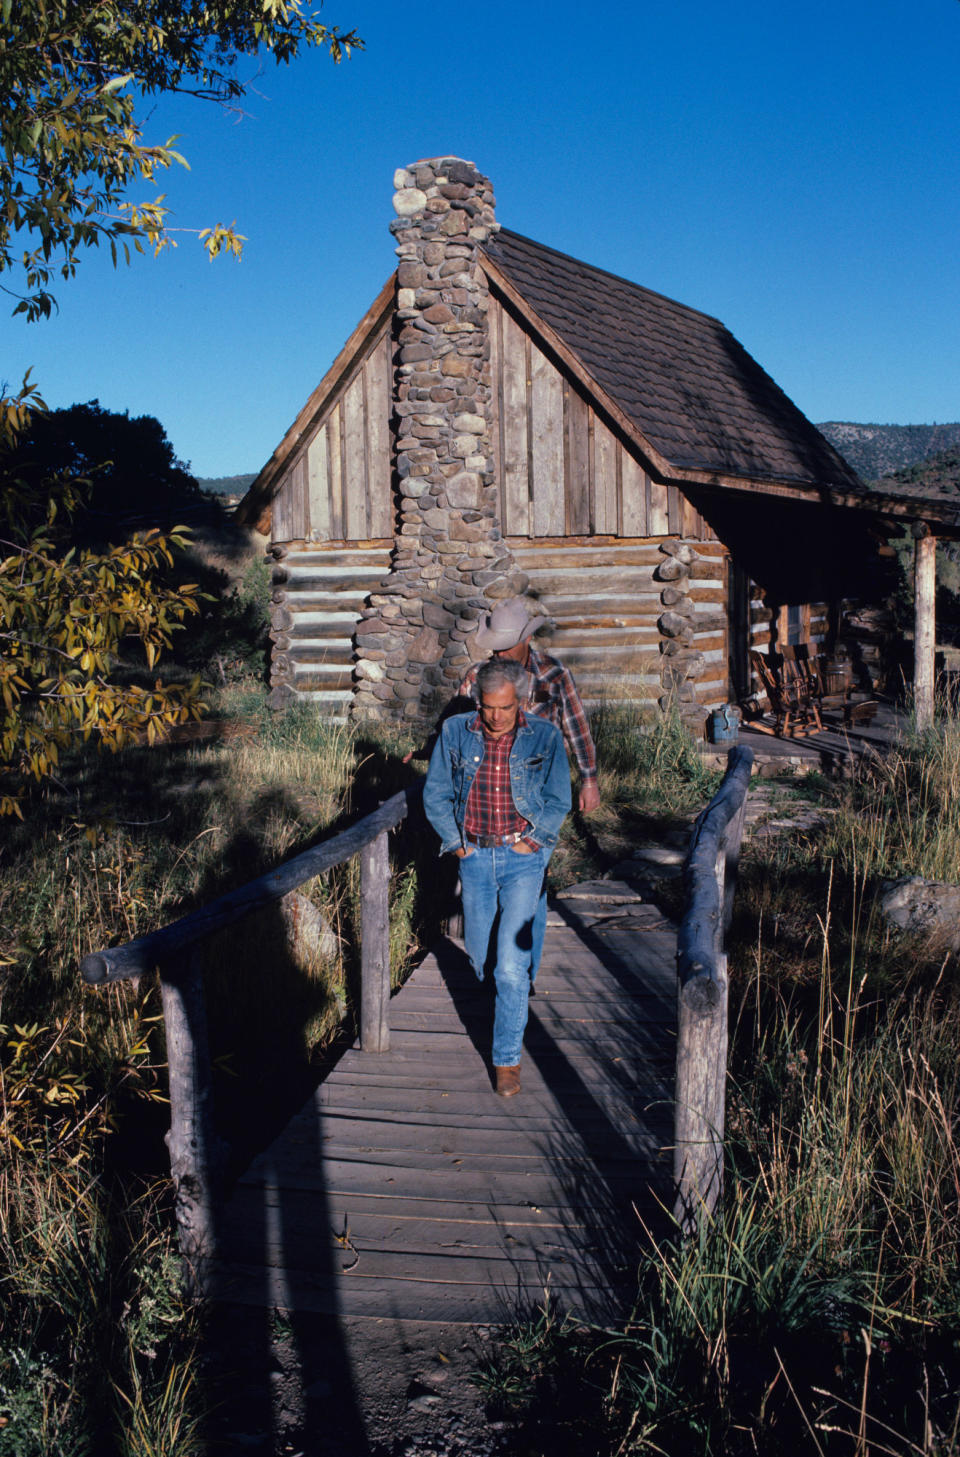 Fashion designer Ralph Lauren in front of the guest house or "cottage" on the "Double RL", Ralph Lauren's 10-thousand-acre ranch deep in the mountains of southern Colorado, Lauren's vision of the Western good life named for Ralph and his wife Ricky on October 7, 1985 in Ridgway, Colorado.